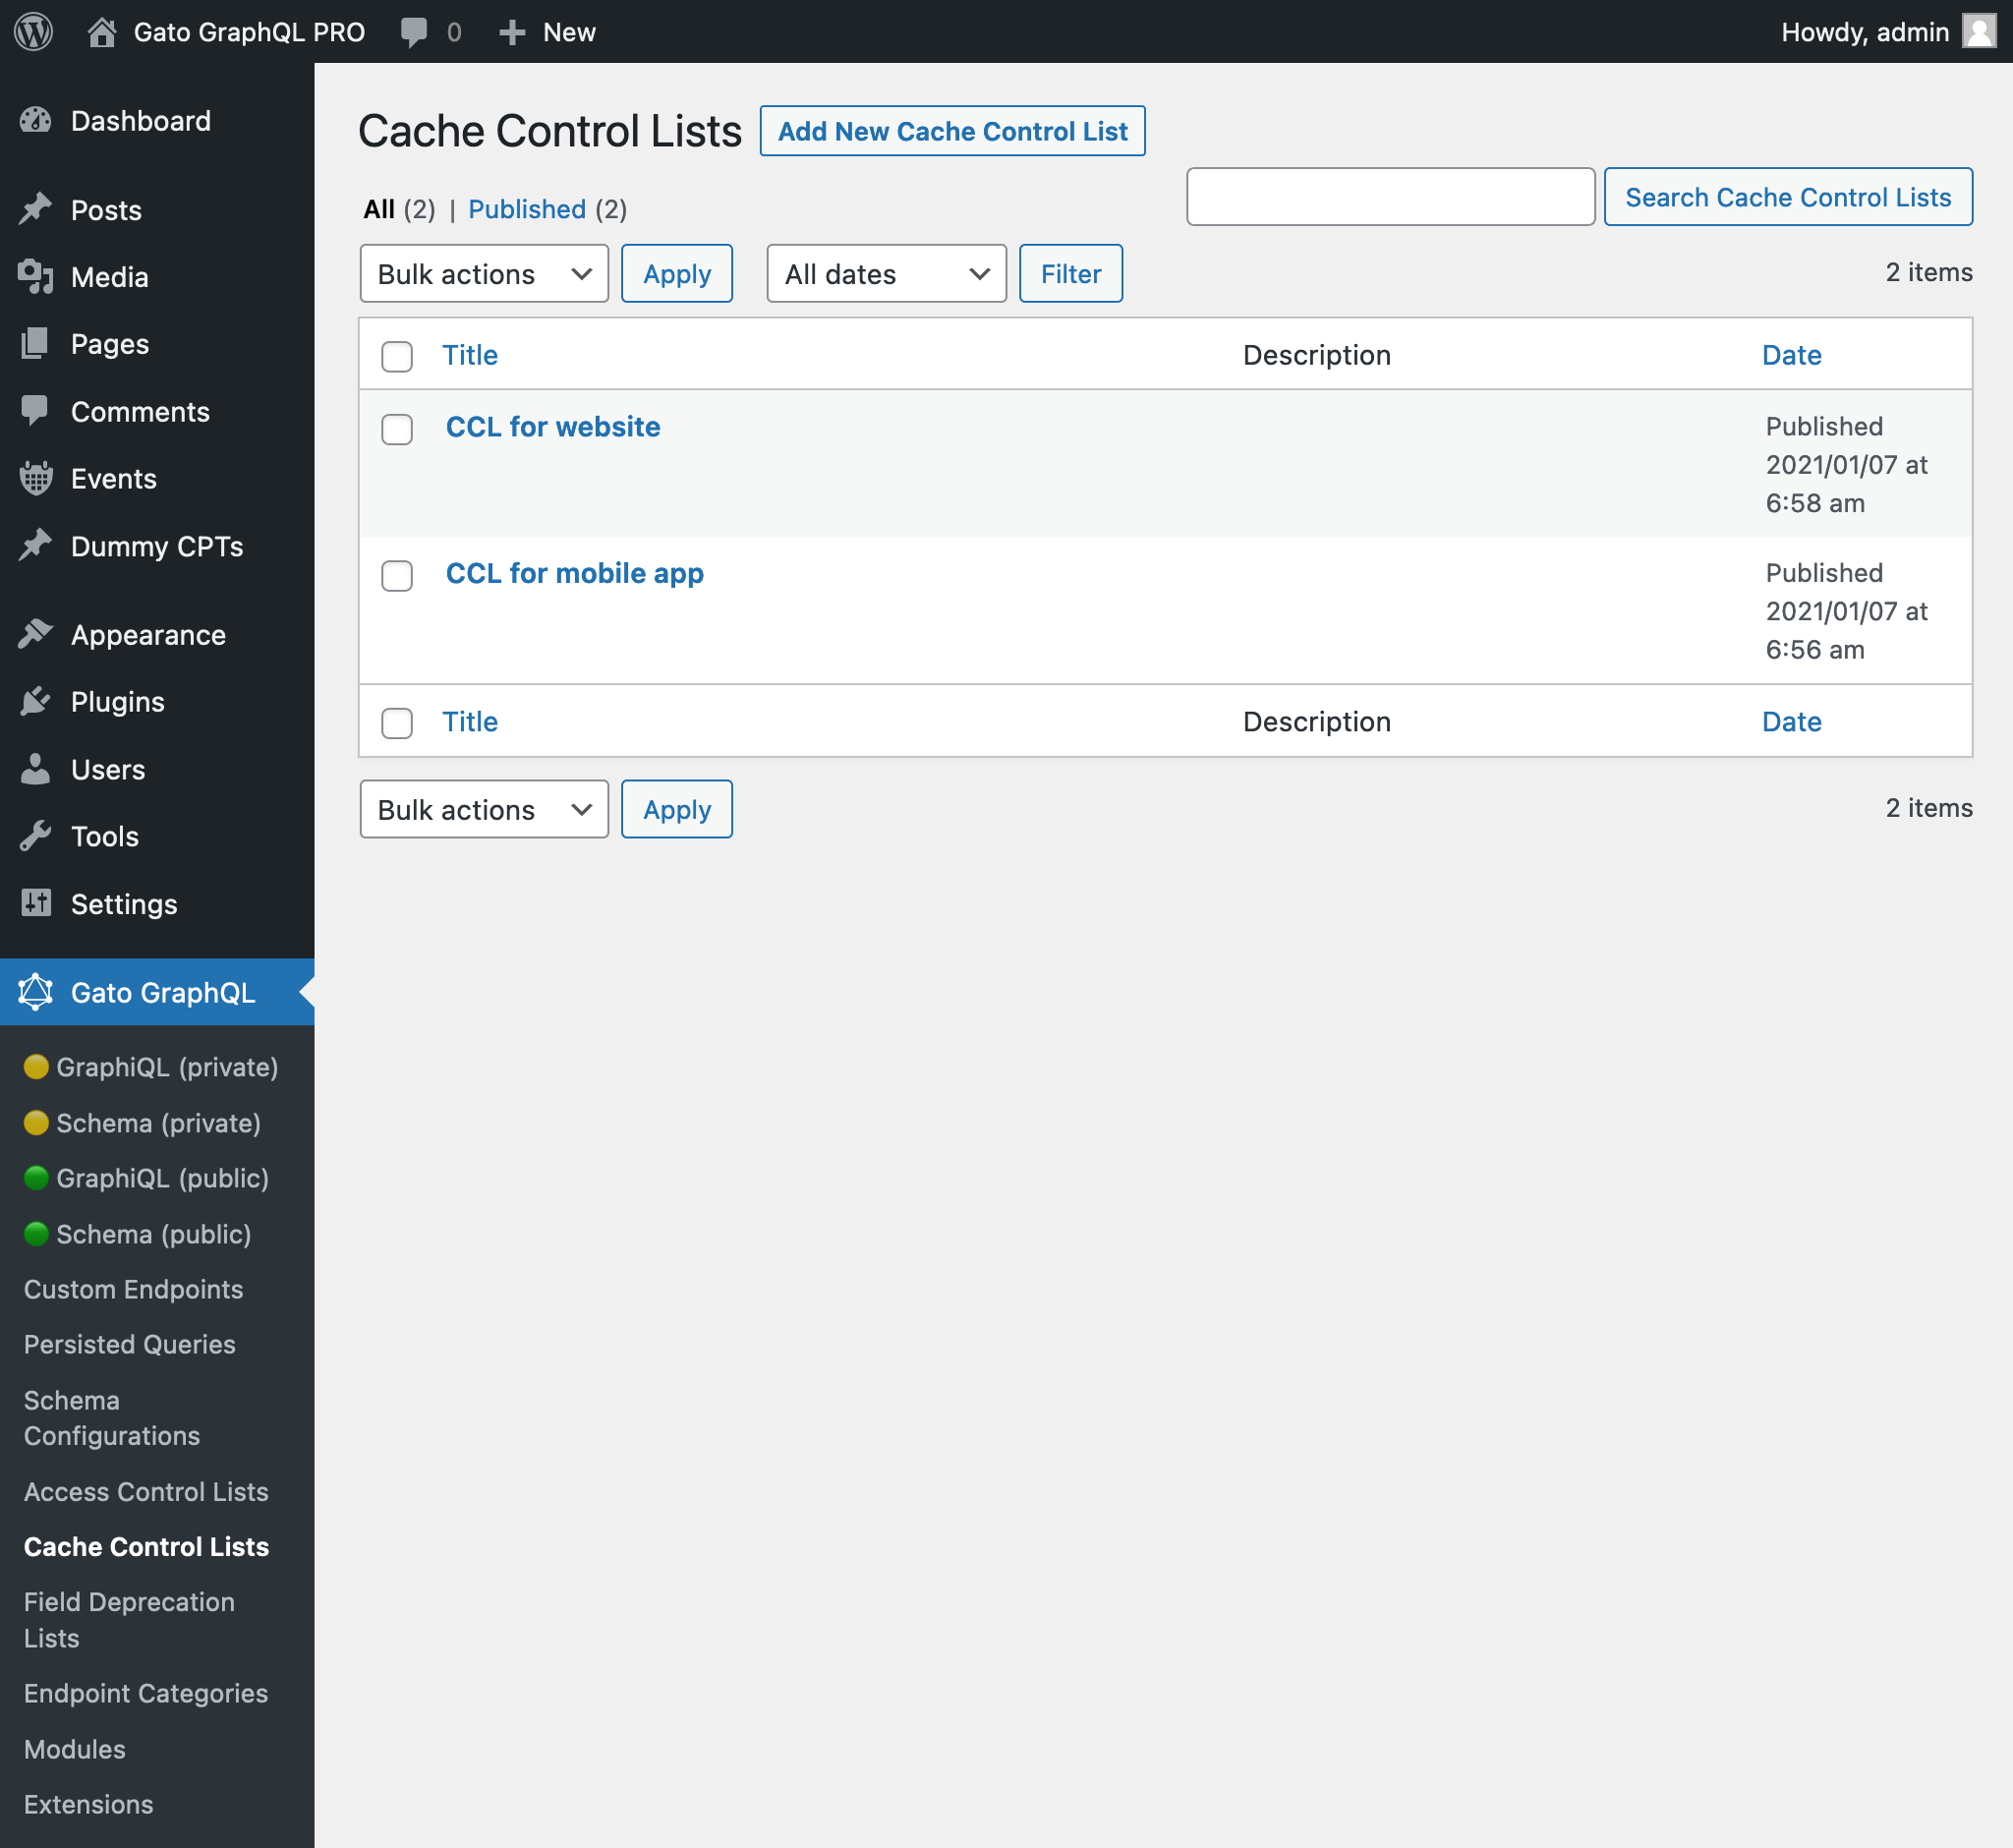 Cache Control Lists in the admin